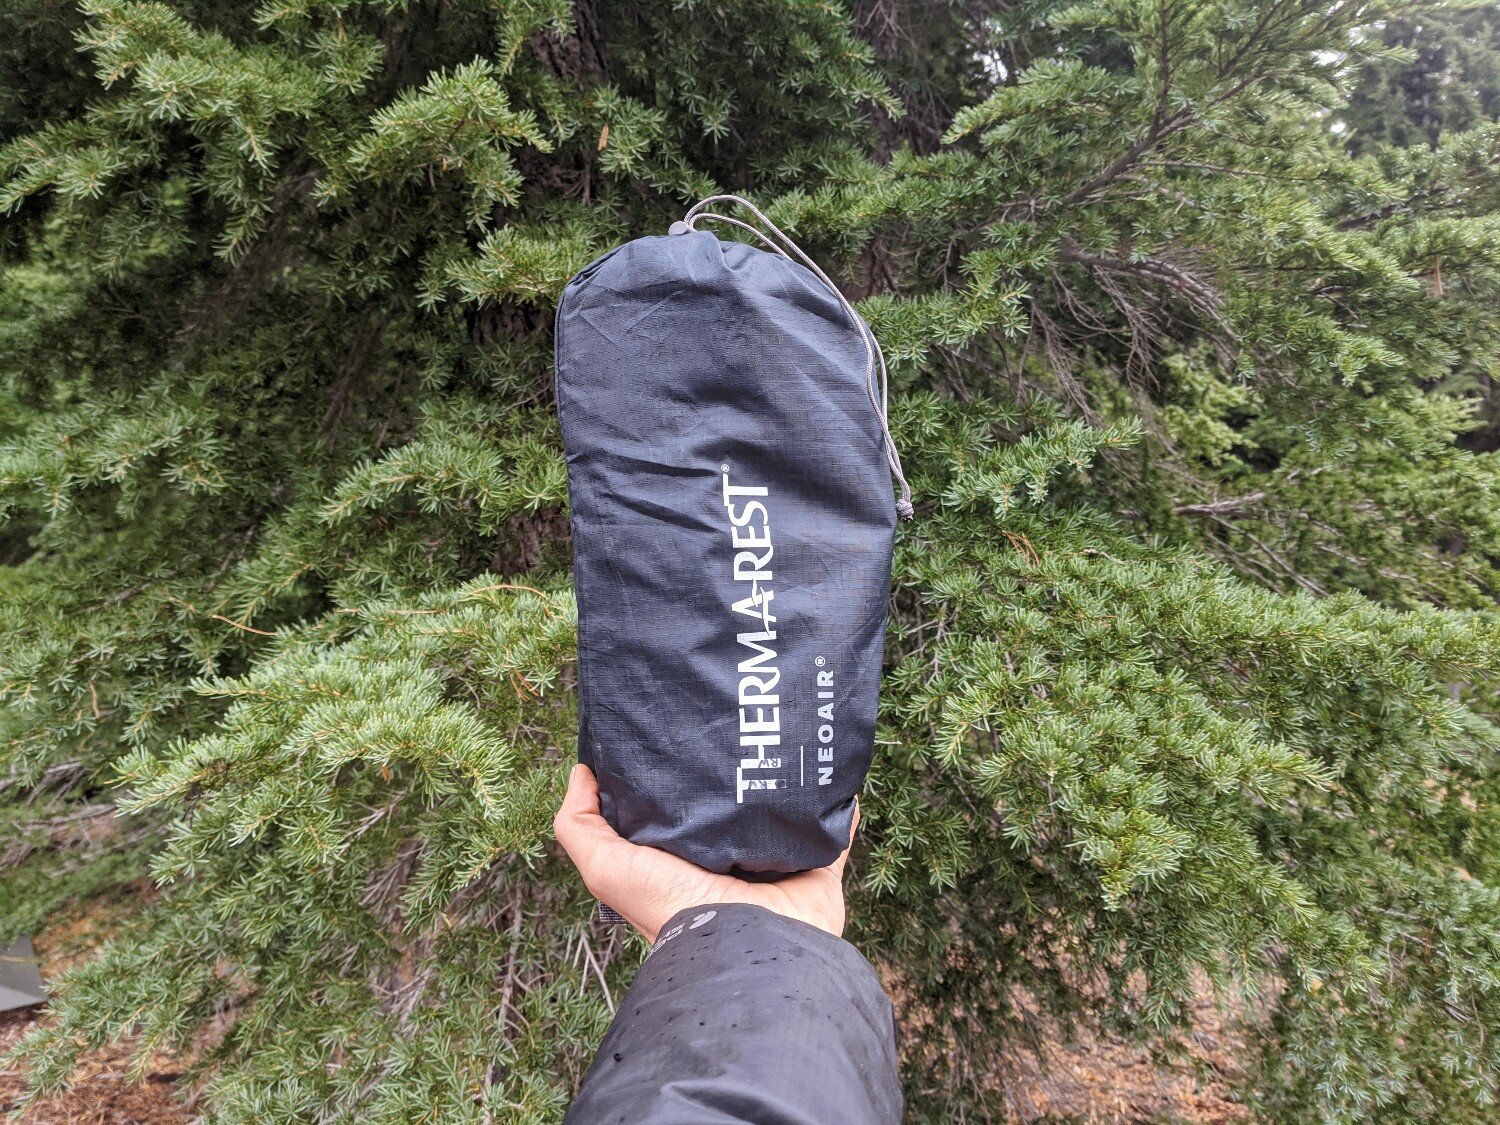 The Therm-a-Rest XLite is about the size of a Nalgene when packed. (Regular/wide size pictured above)